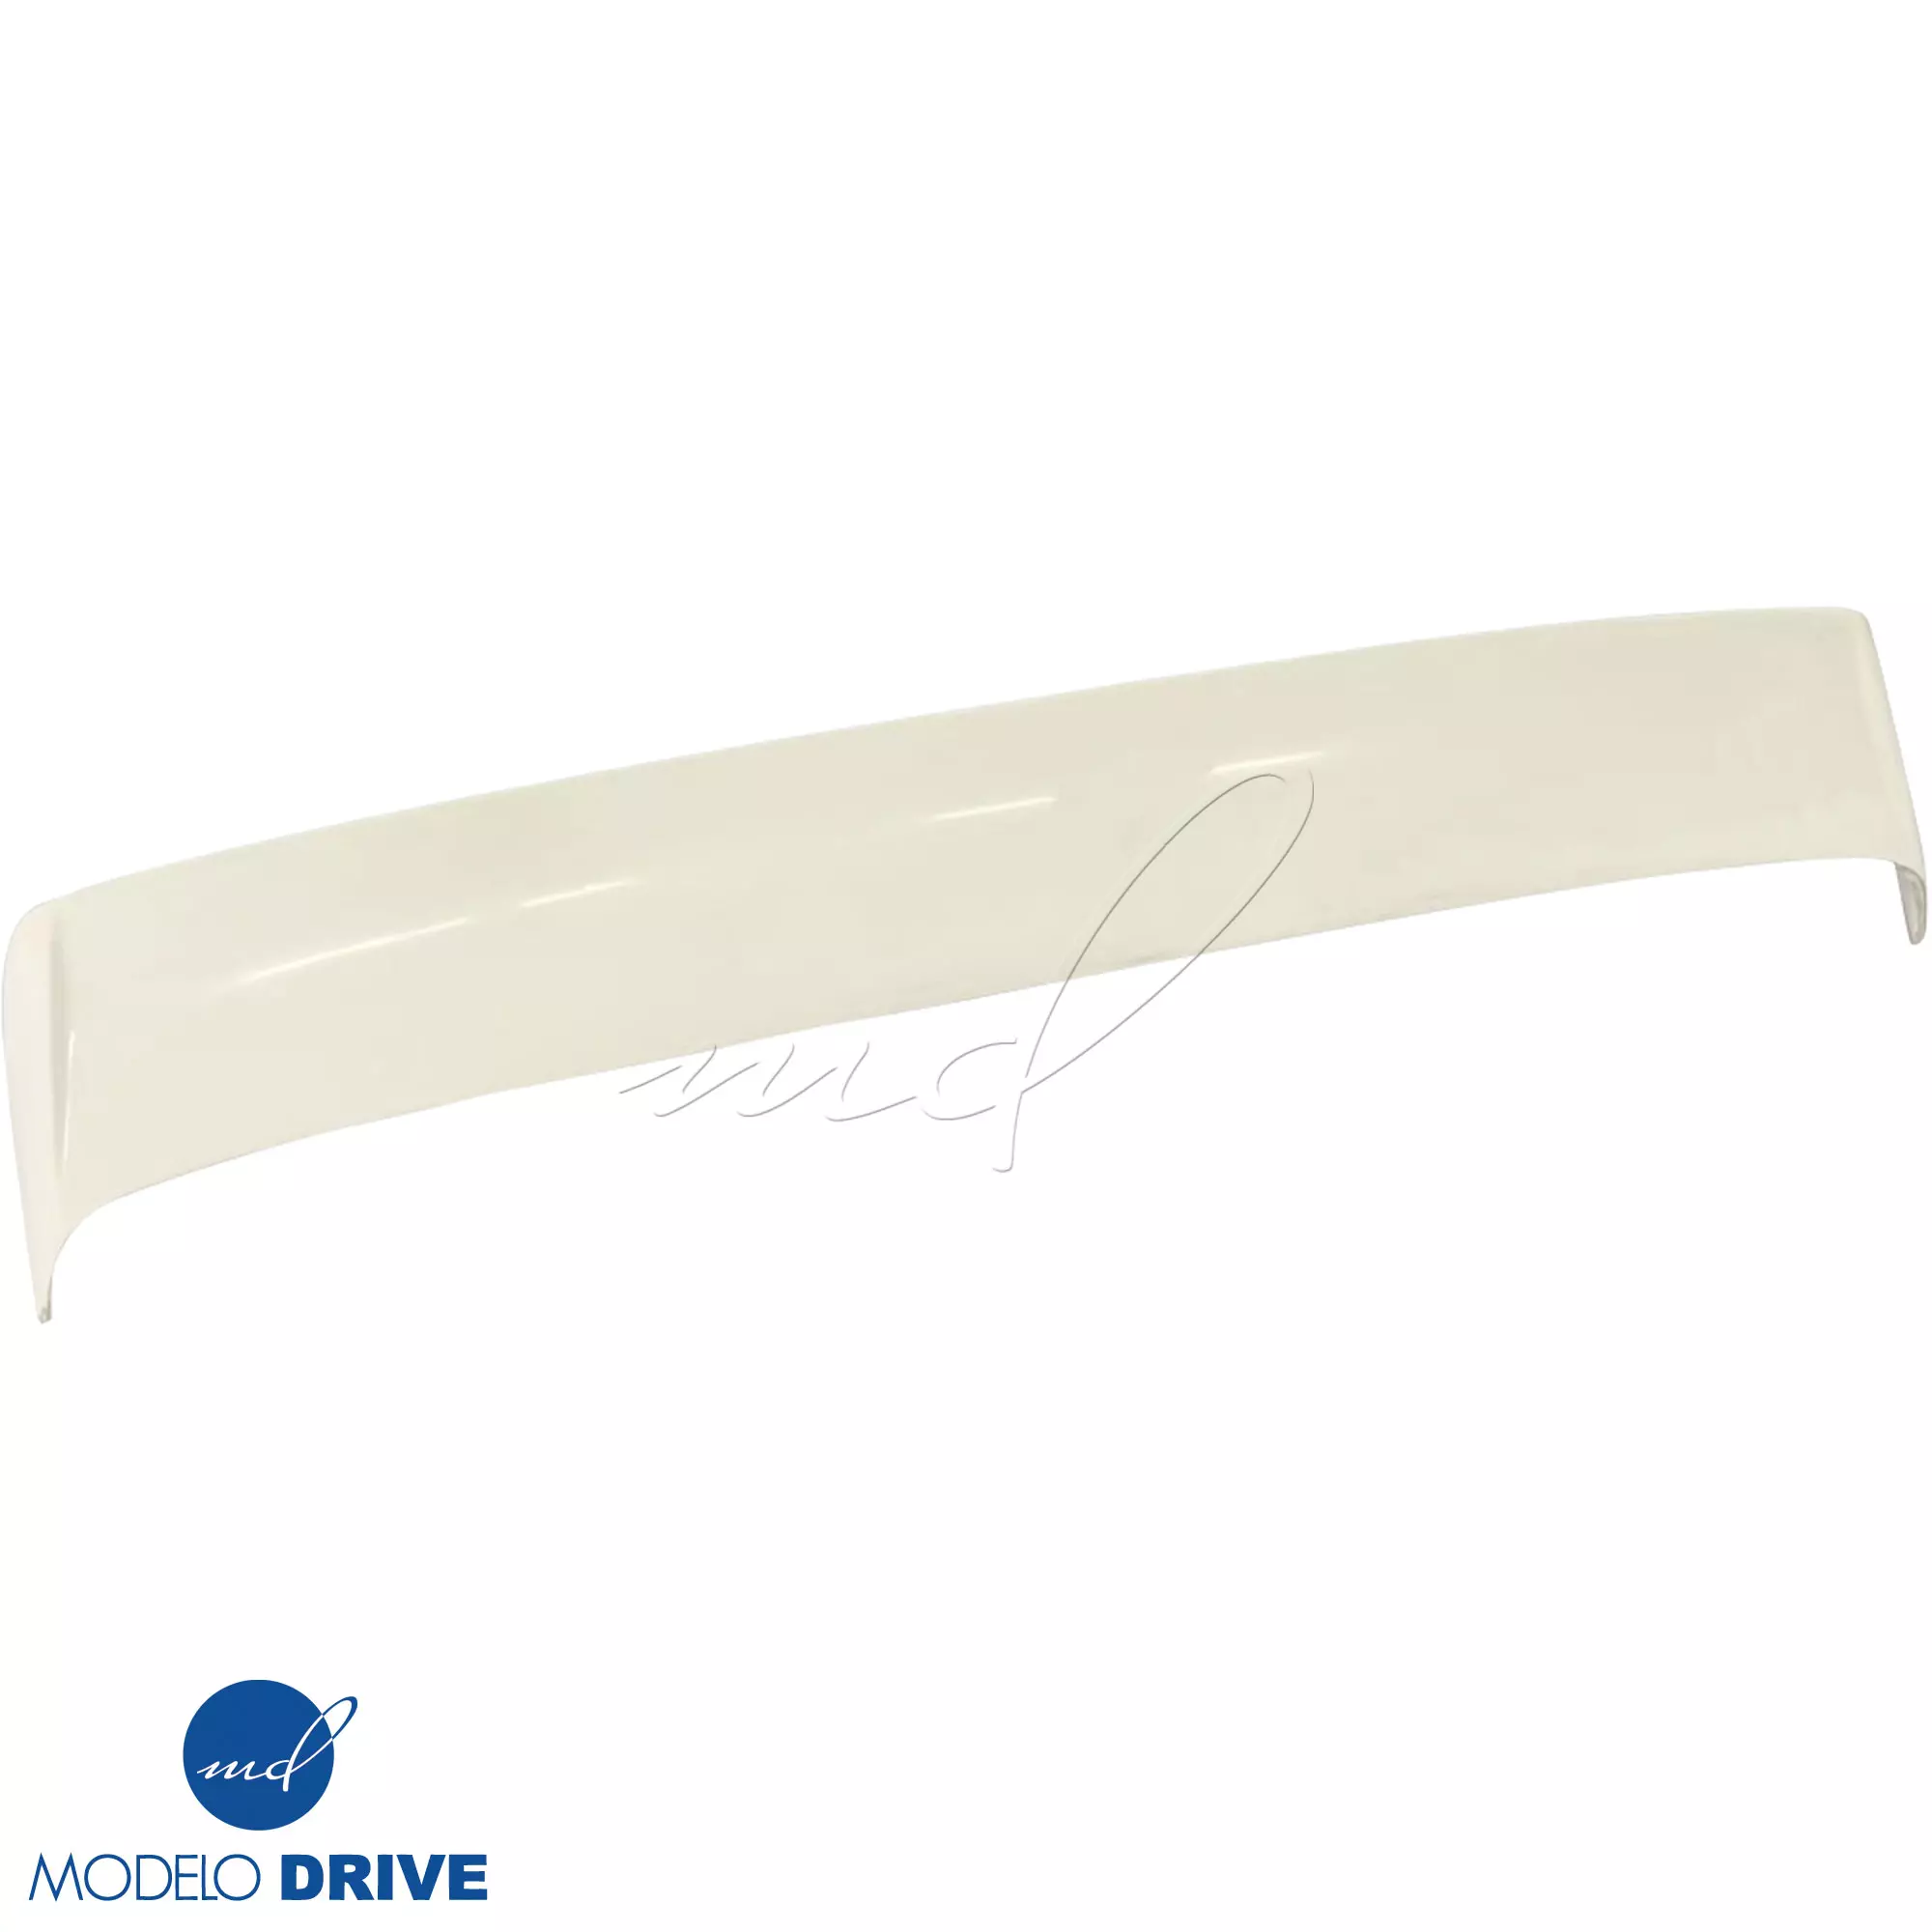 ModeloDrive FRP DMA Trunk Spoiler Wing > Nissan Skyline R32 1990-1994 > 2dr Coupe - Image 23